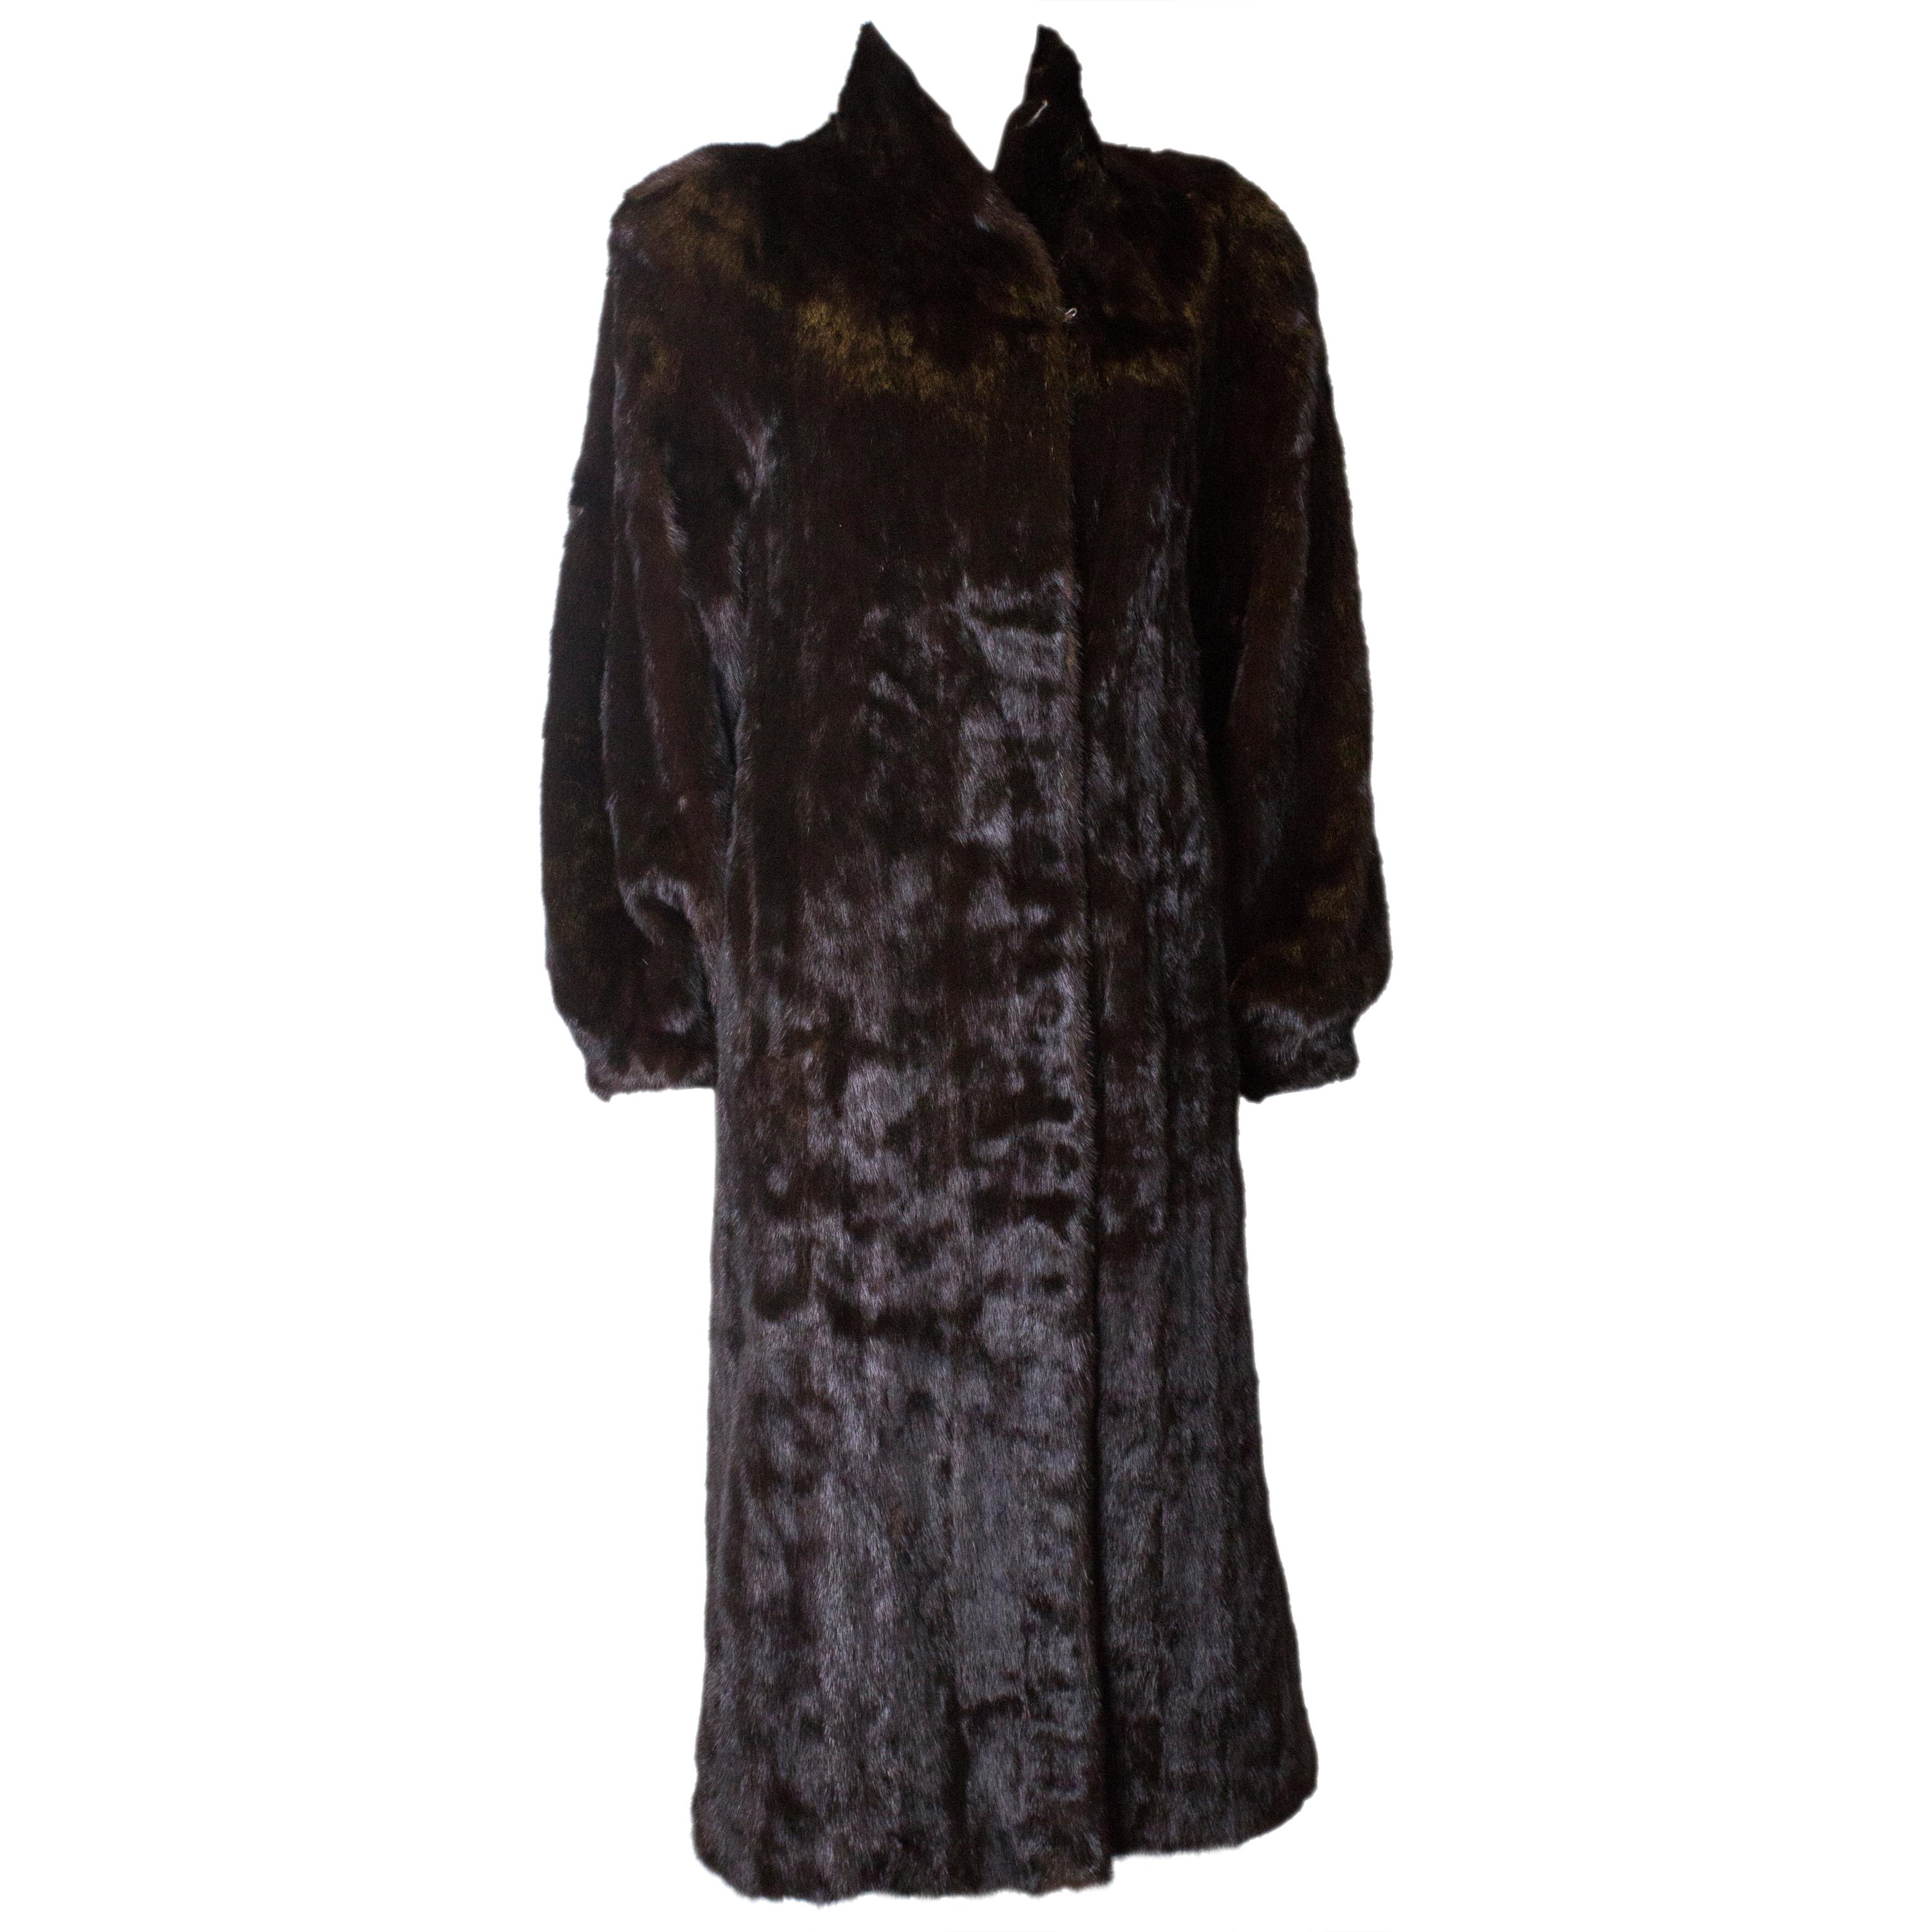 What is a vintage mink coat worth?